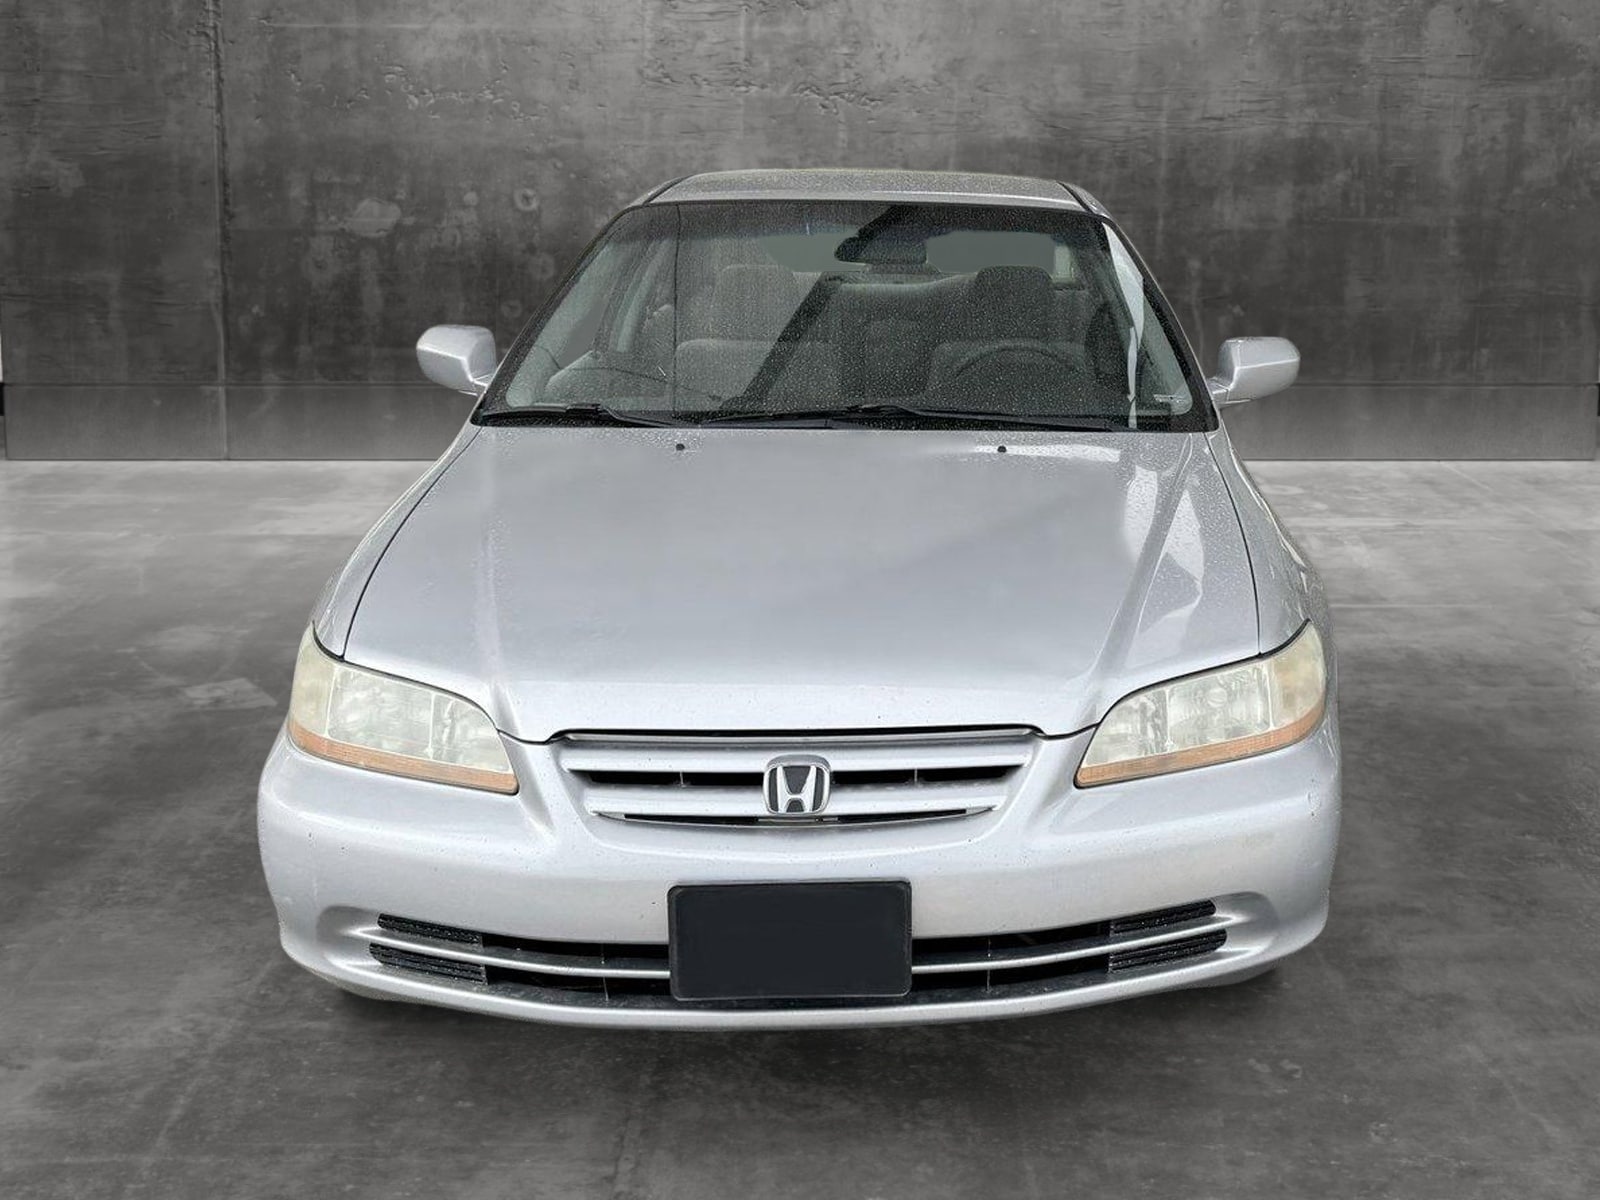 Used 2002 Honda Accord LX with VIN 3HGCG56492G705265 for sale in Centennial, CO